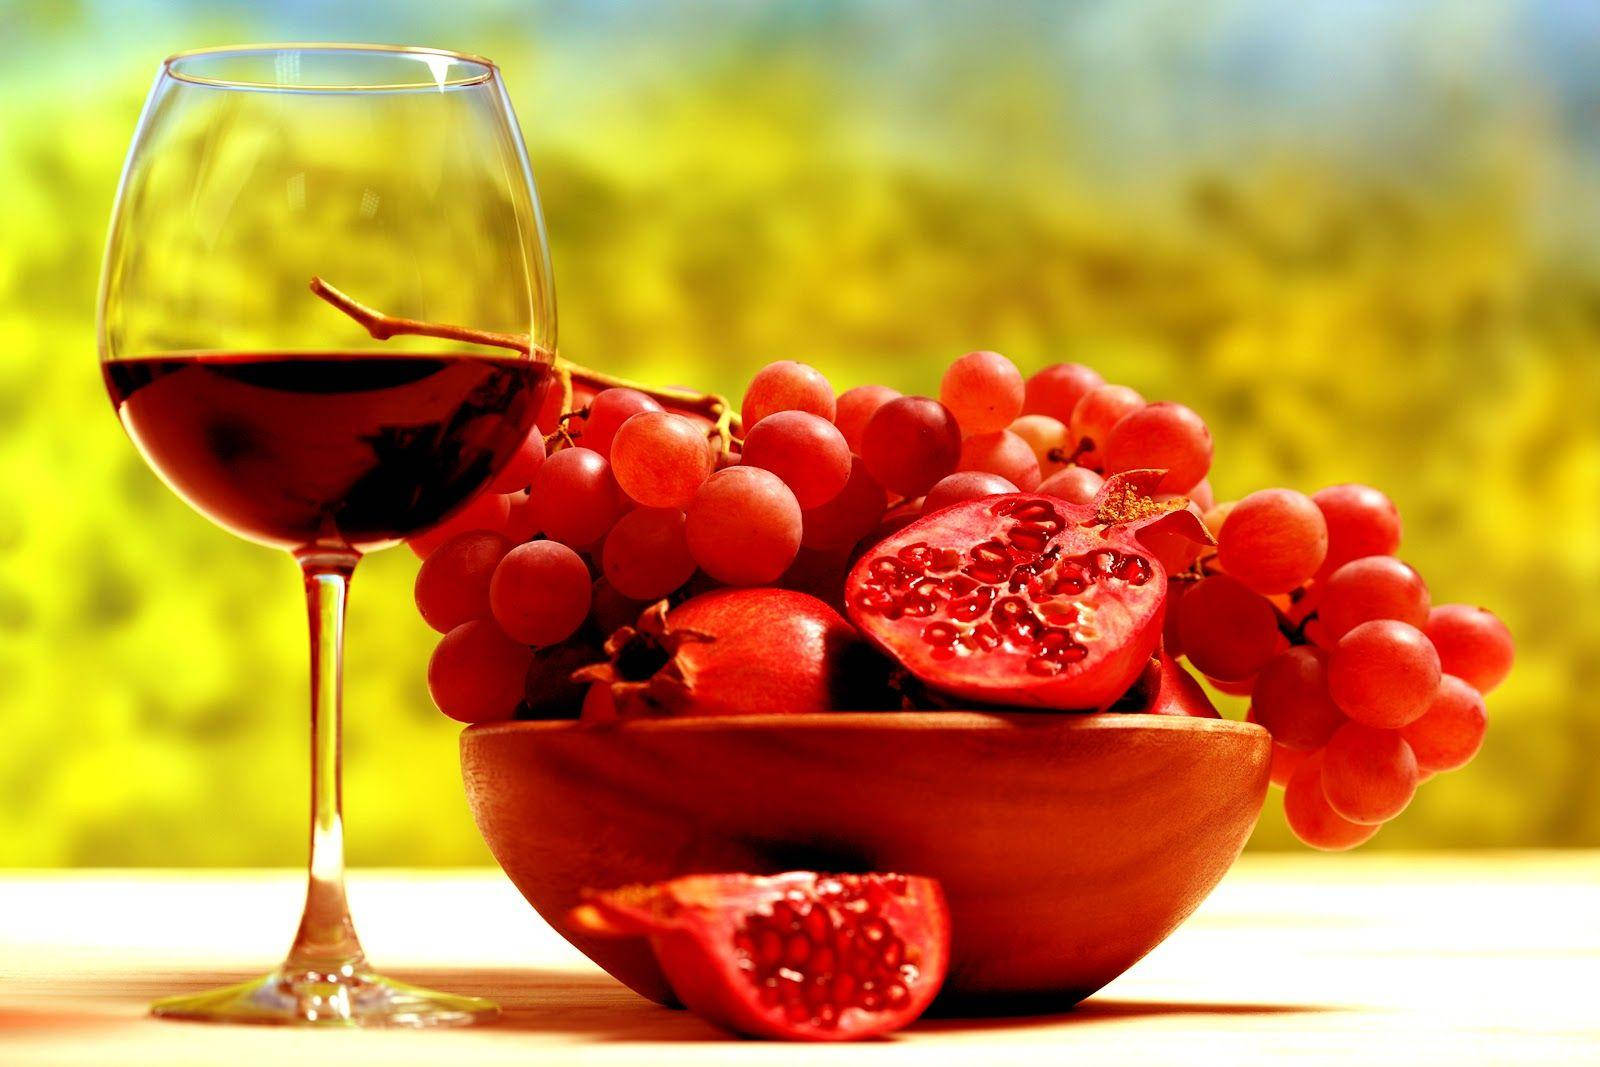 Pomegranate And Grapes Wine Wallpaper